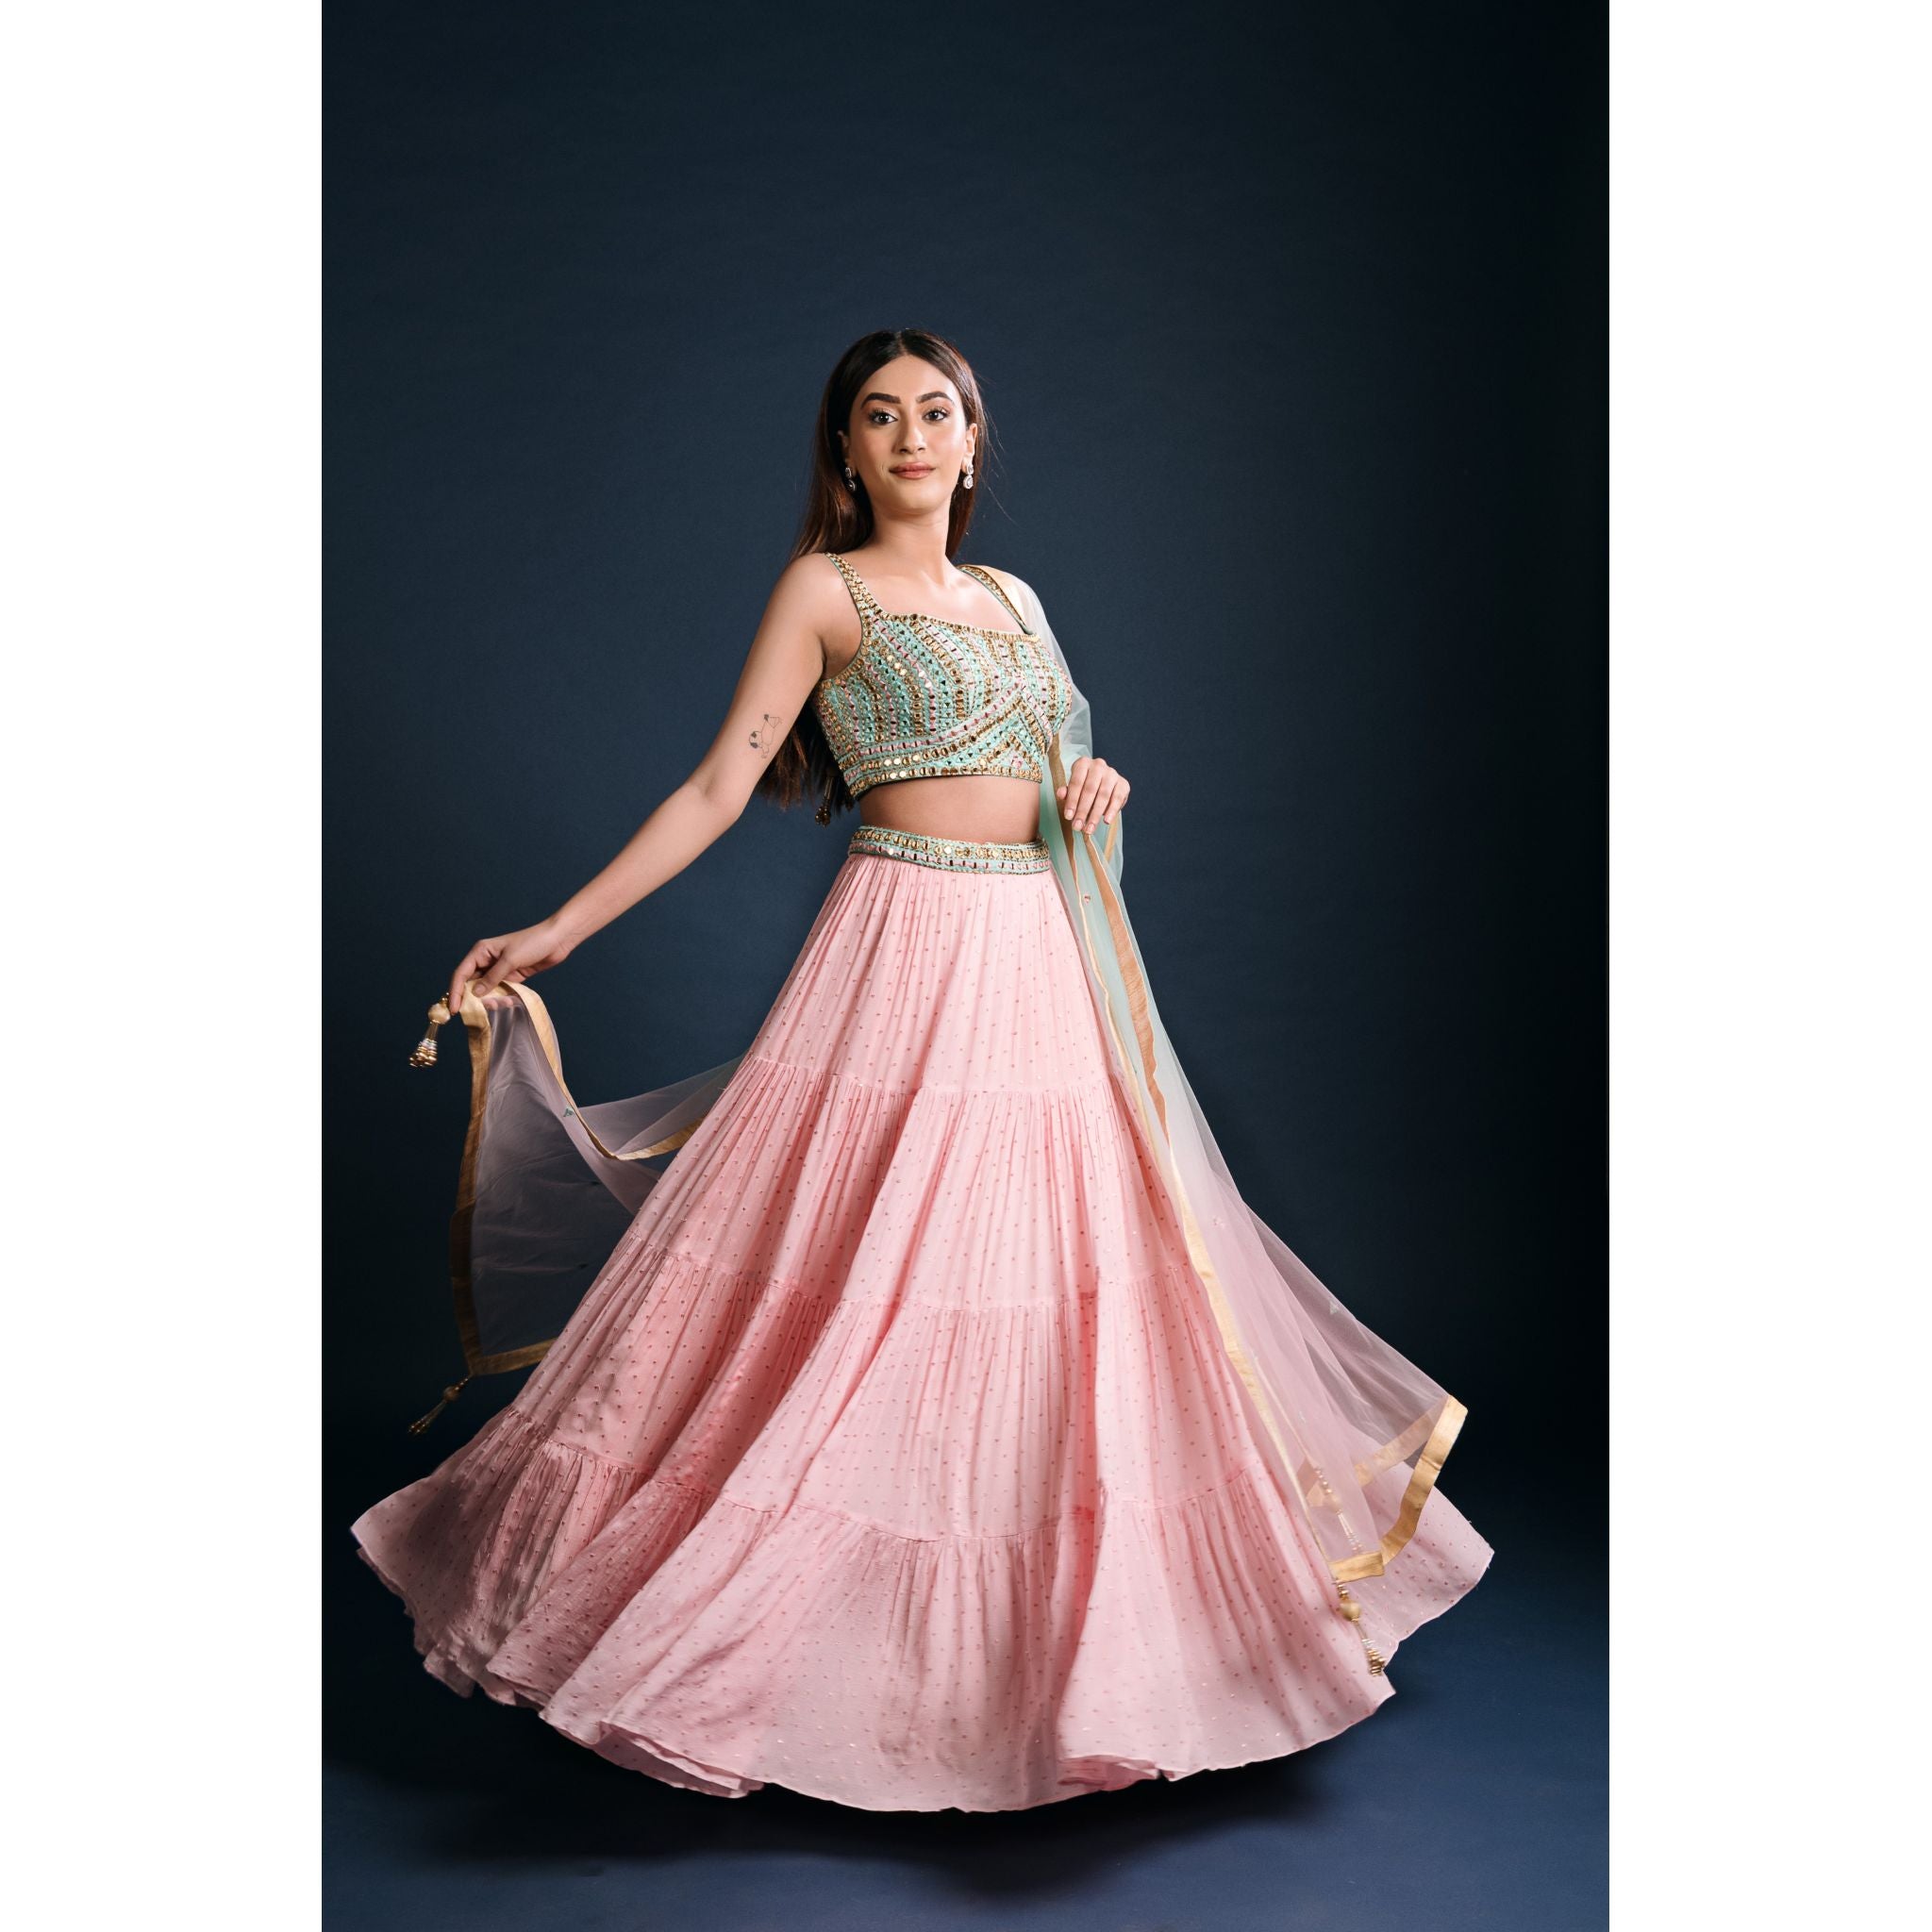 Turquoise And Pink Tiered Lehenga Set - Indian Designer Bridal Wedding Outfit